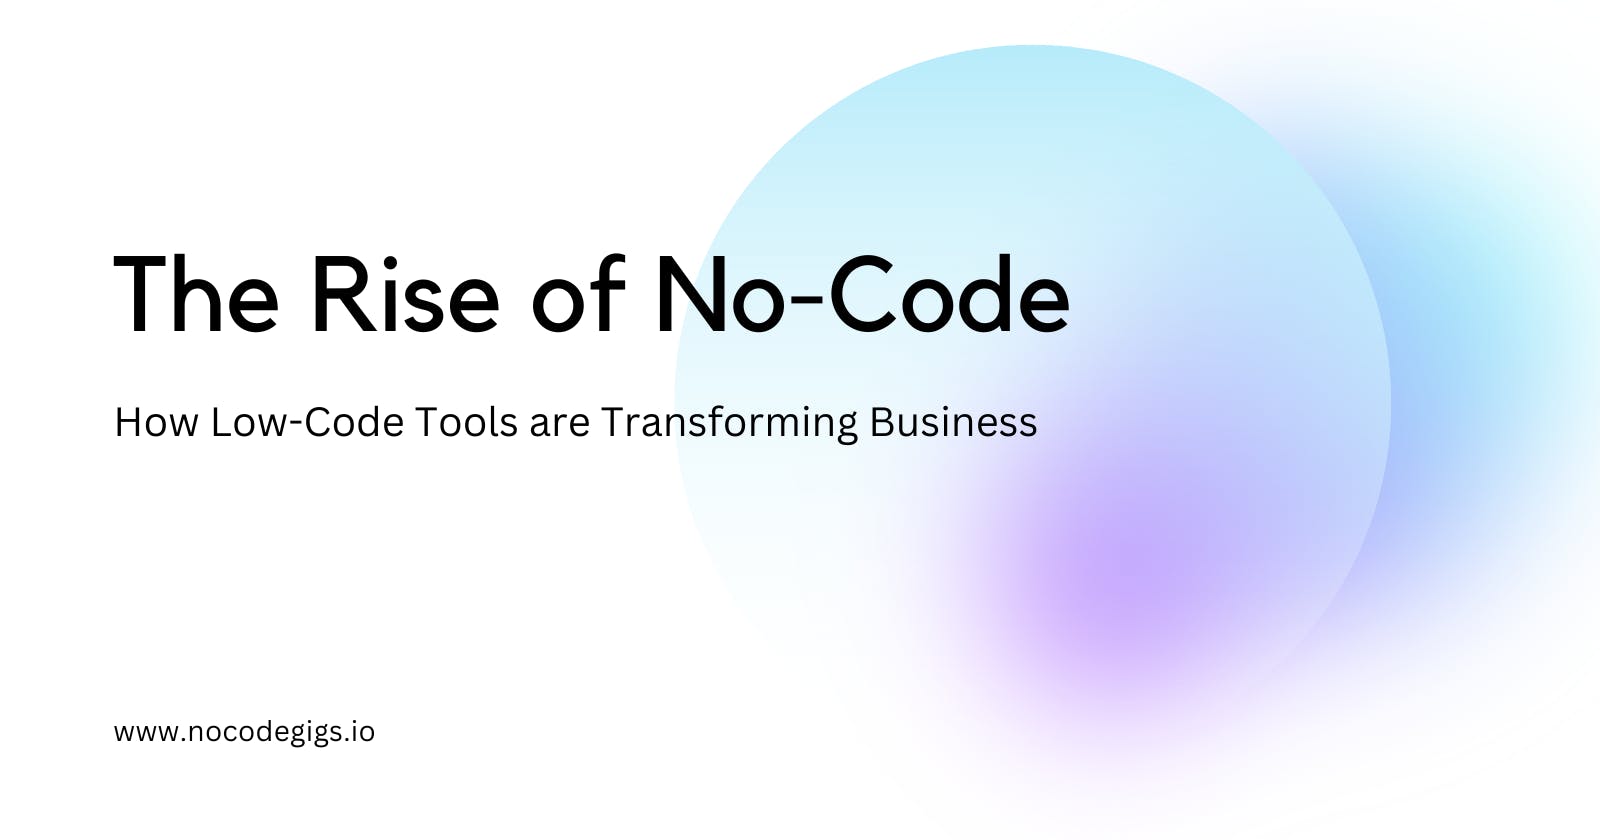 The Rise of No-Code: How Low-Code Tools are Transforming Business